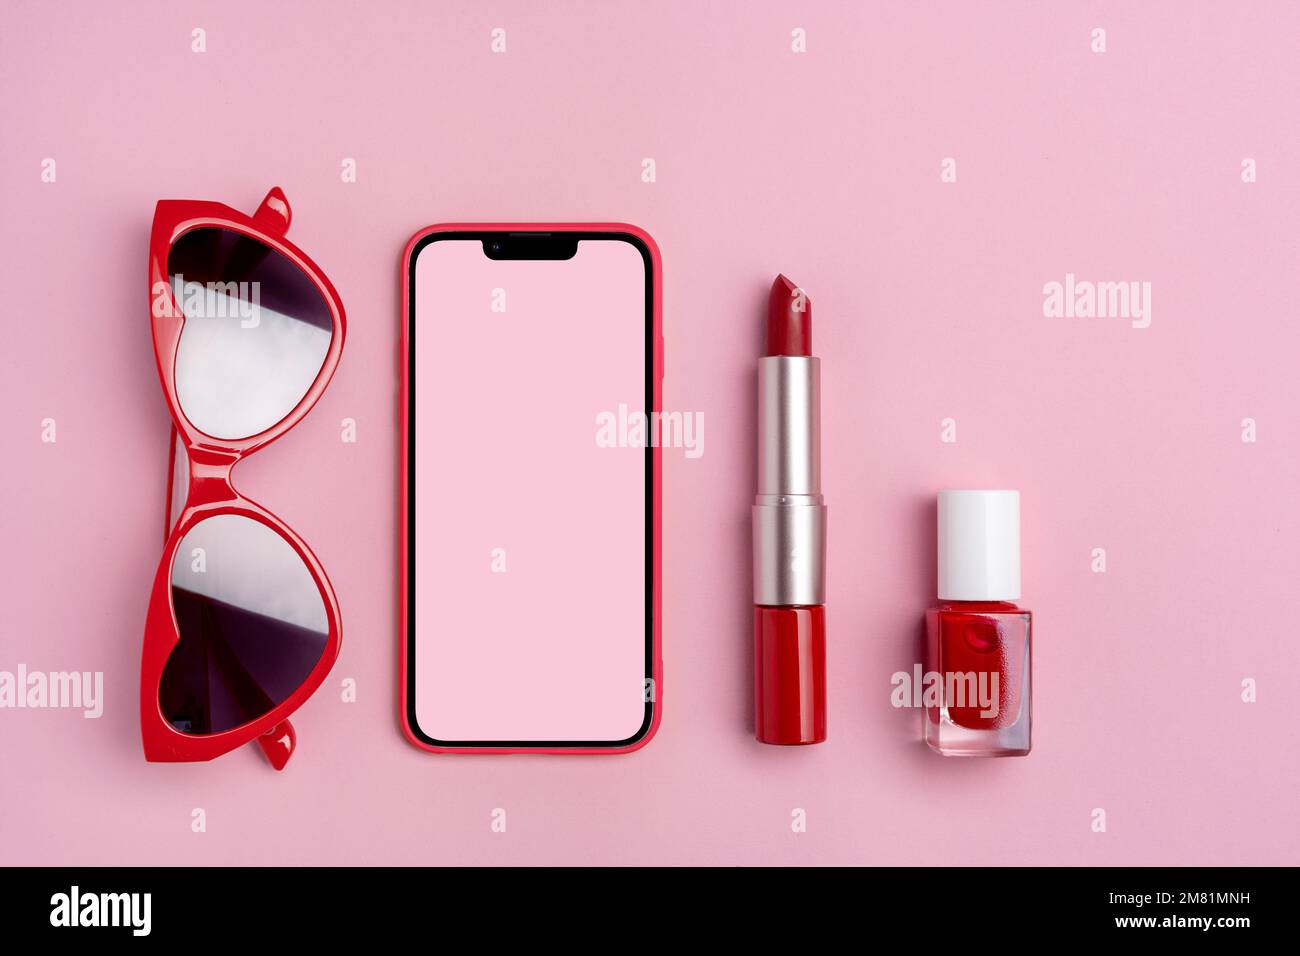 Set of sunglasses, phone, red lipstick and nail polish on pink background. Valentines day background Stock Photo